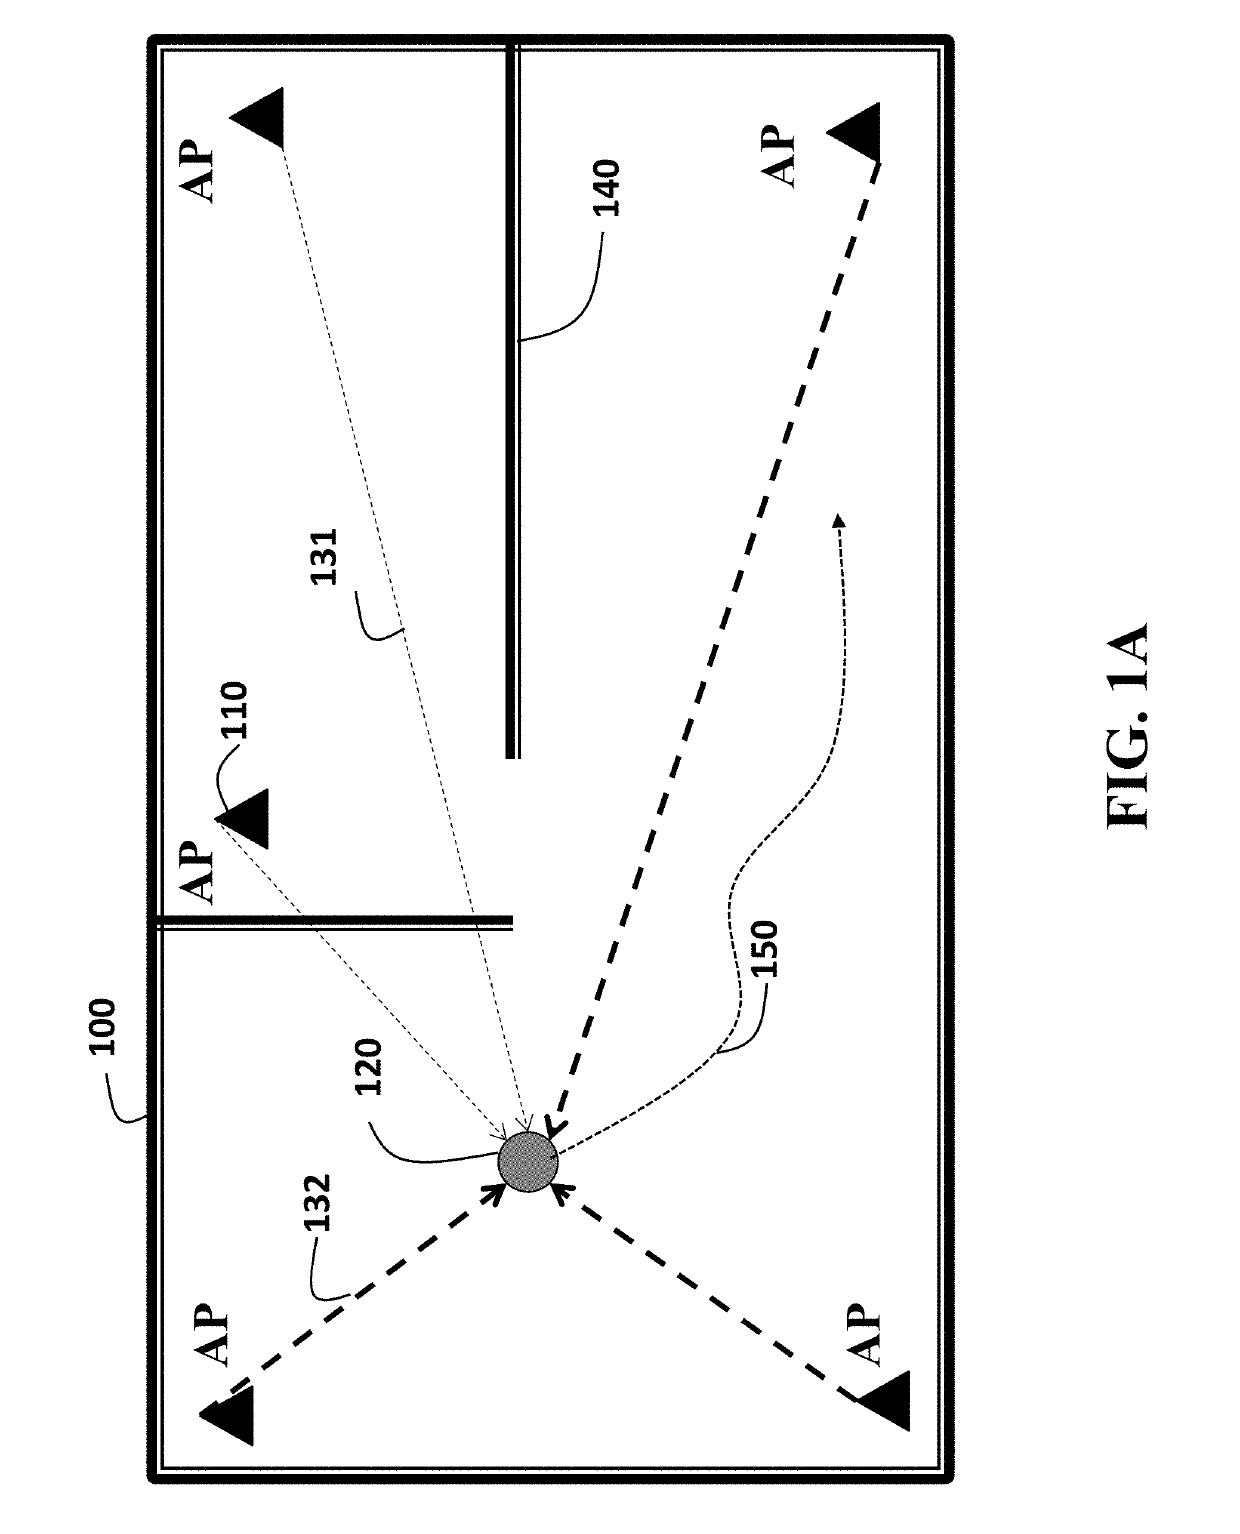 Device localization using RSS based path loss exponent estimation